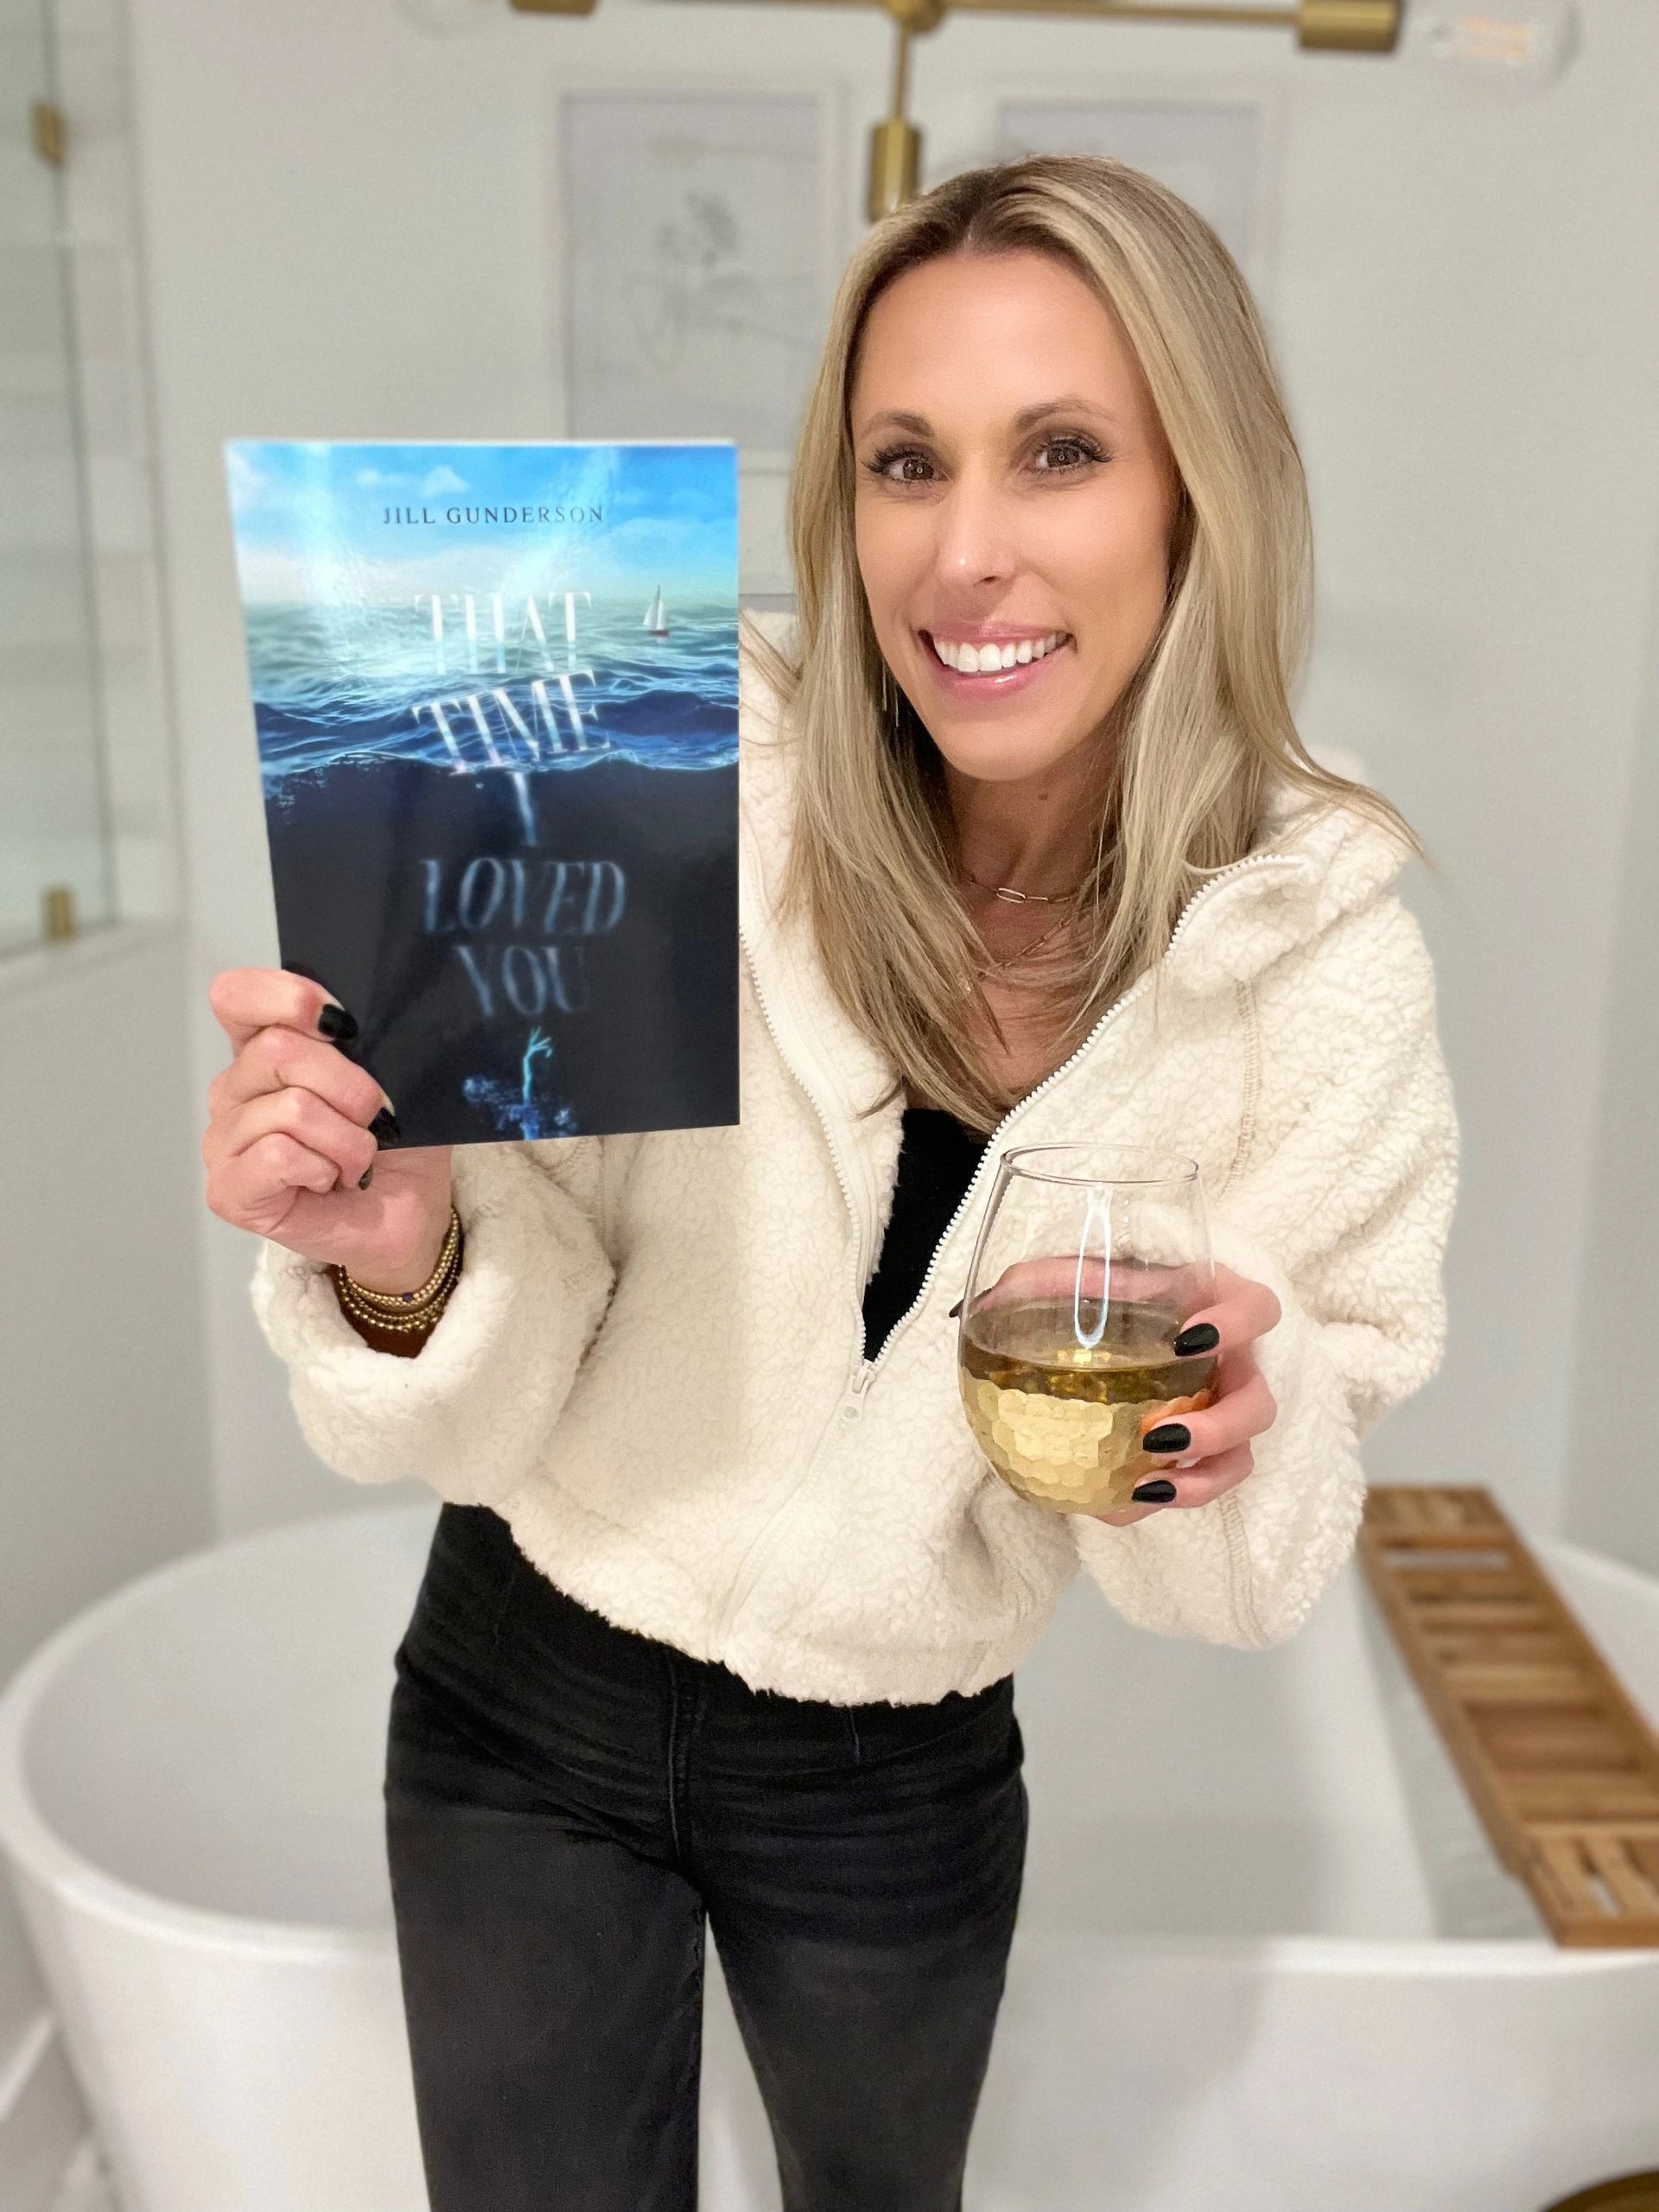 Jill is standing in her bathroom, holdering her book and a glass of wine.